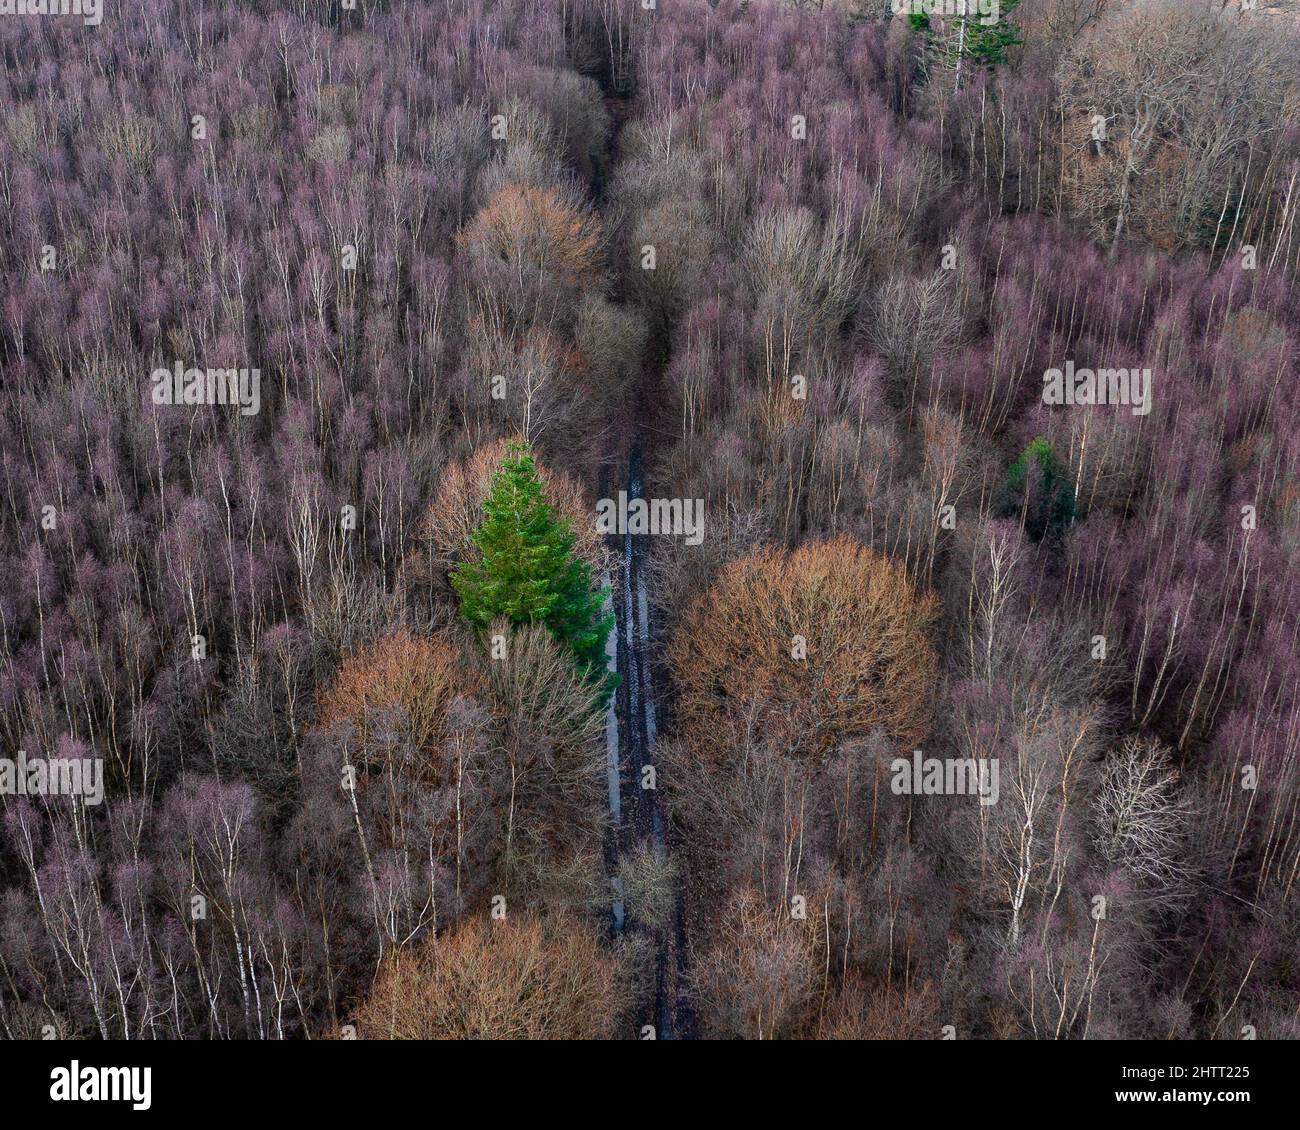 The Pathway in the forest with tall trees in purple and green Stock Photo